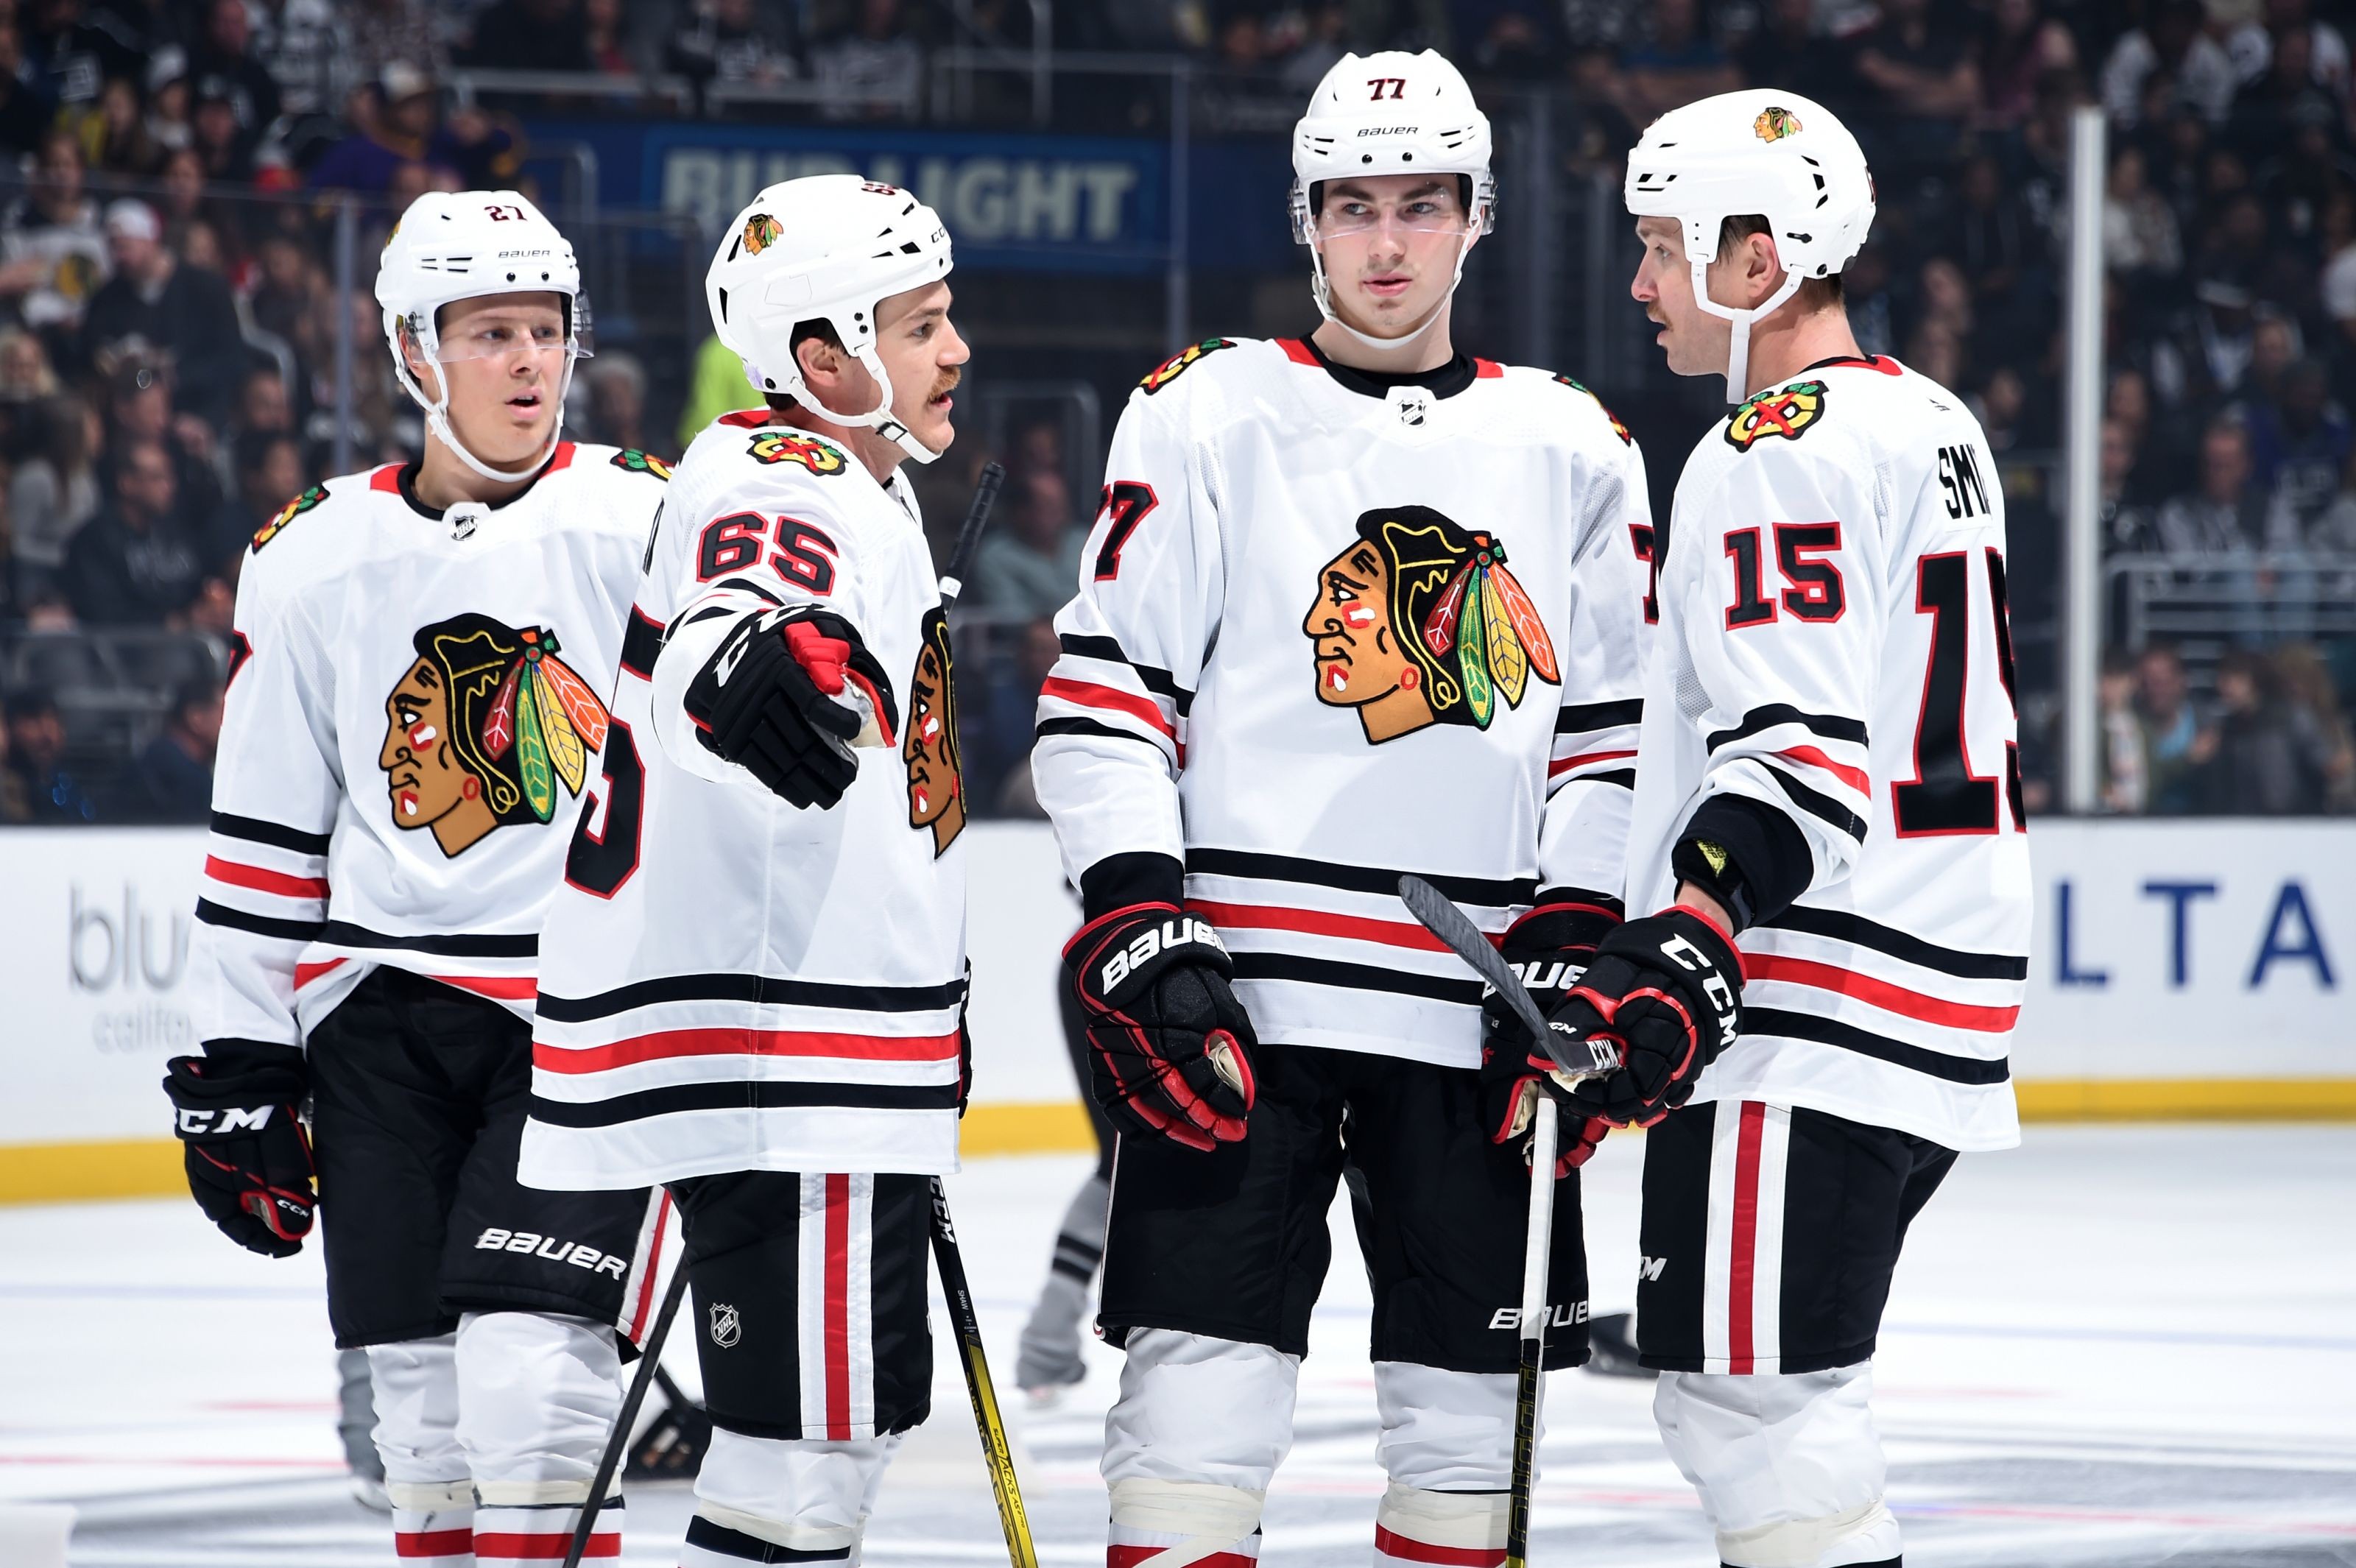 11/3 Game Preview: Chicago Blackhawks at Anaheim